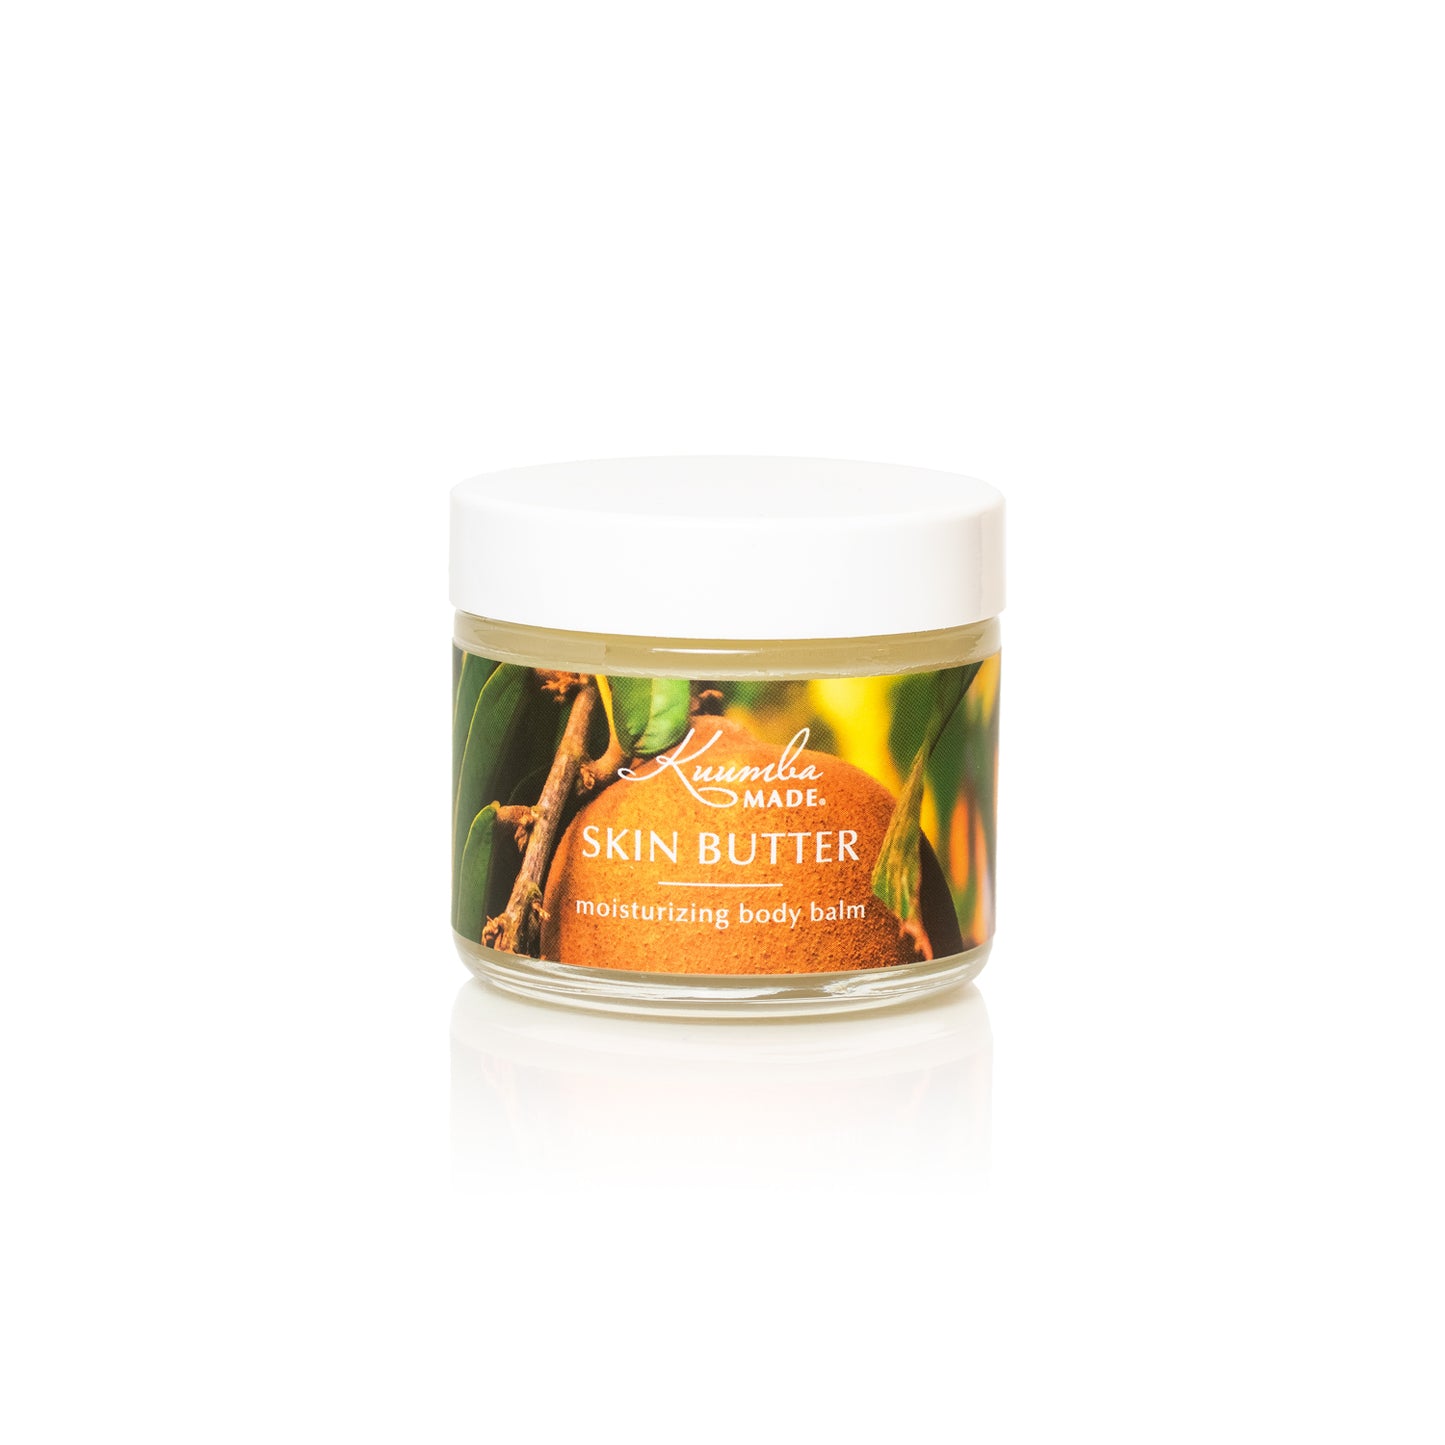 Skin Butter Botanically Infused Body Balm